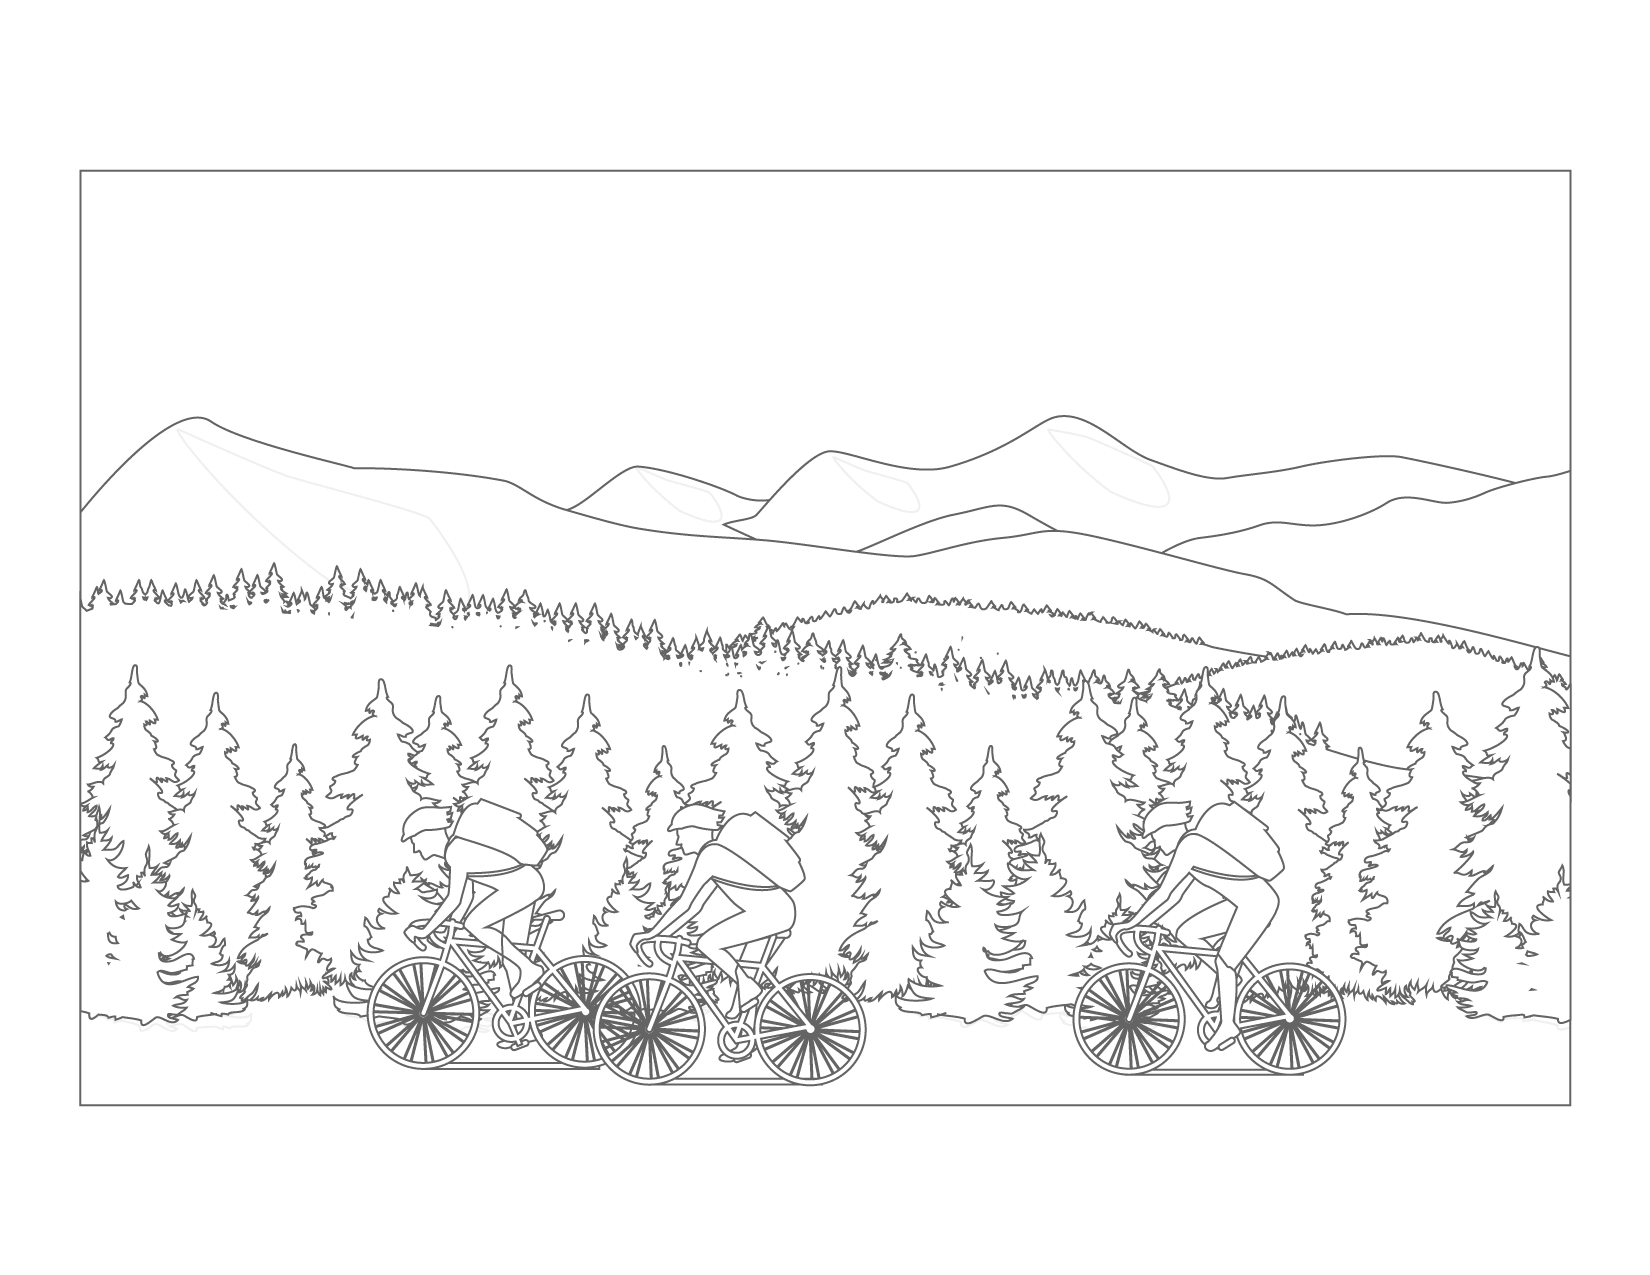 Bike Ride Through The Mountains Coloring Page